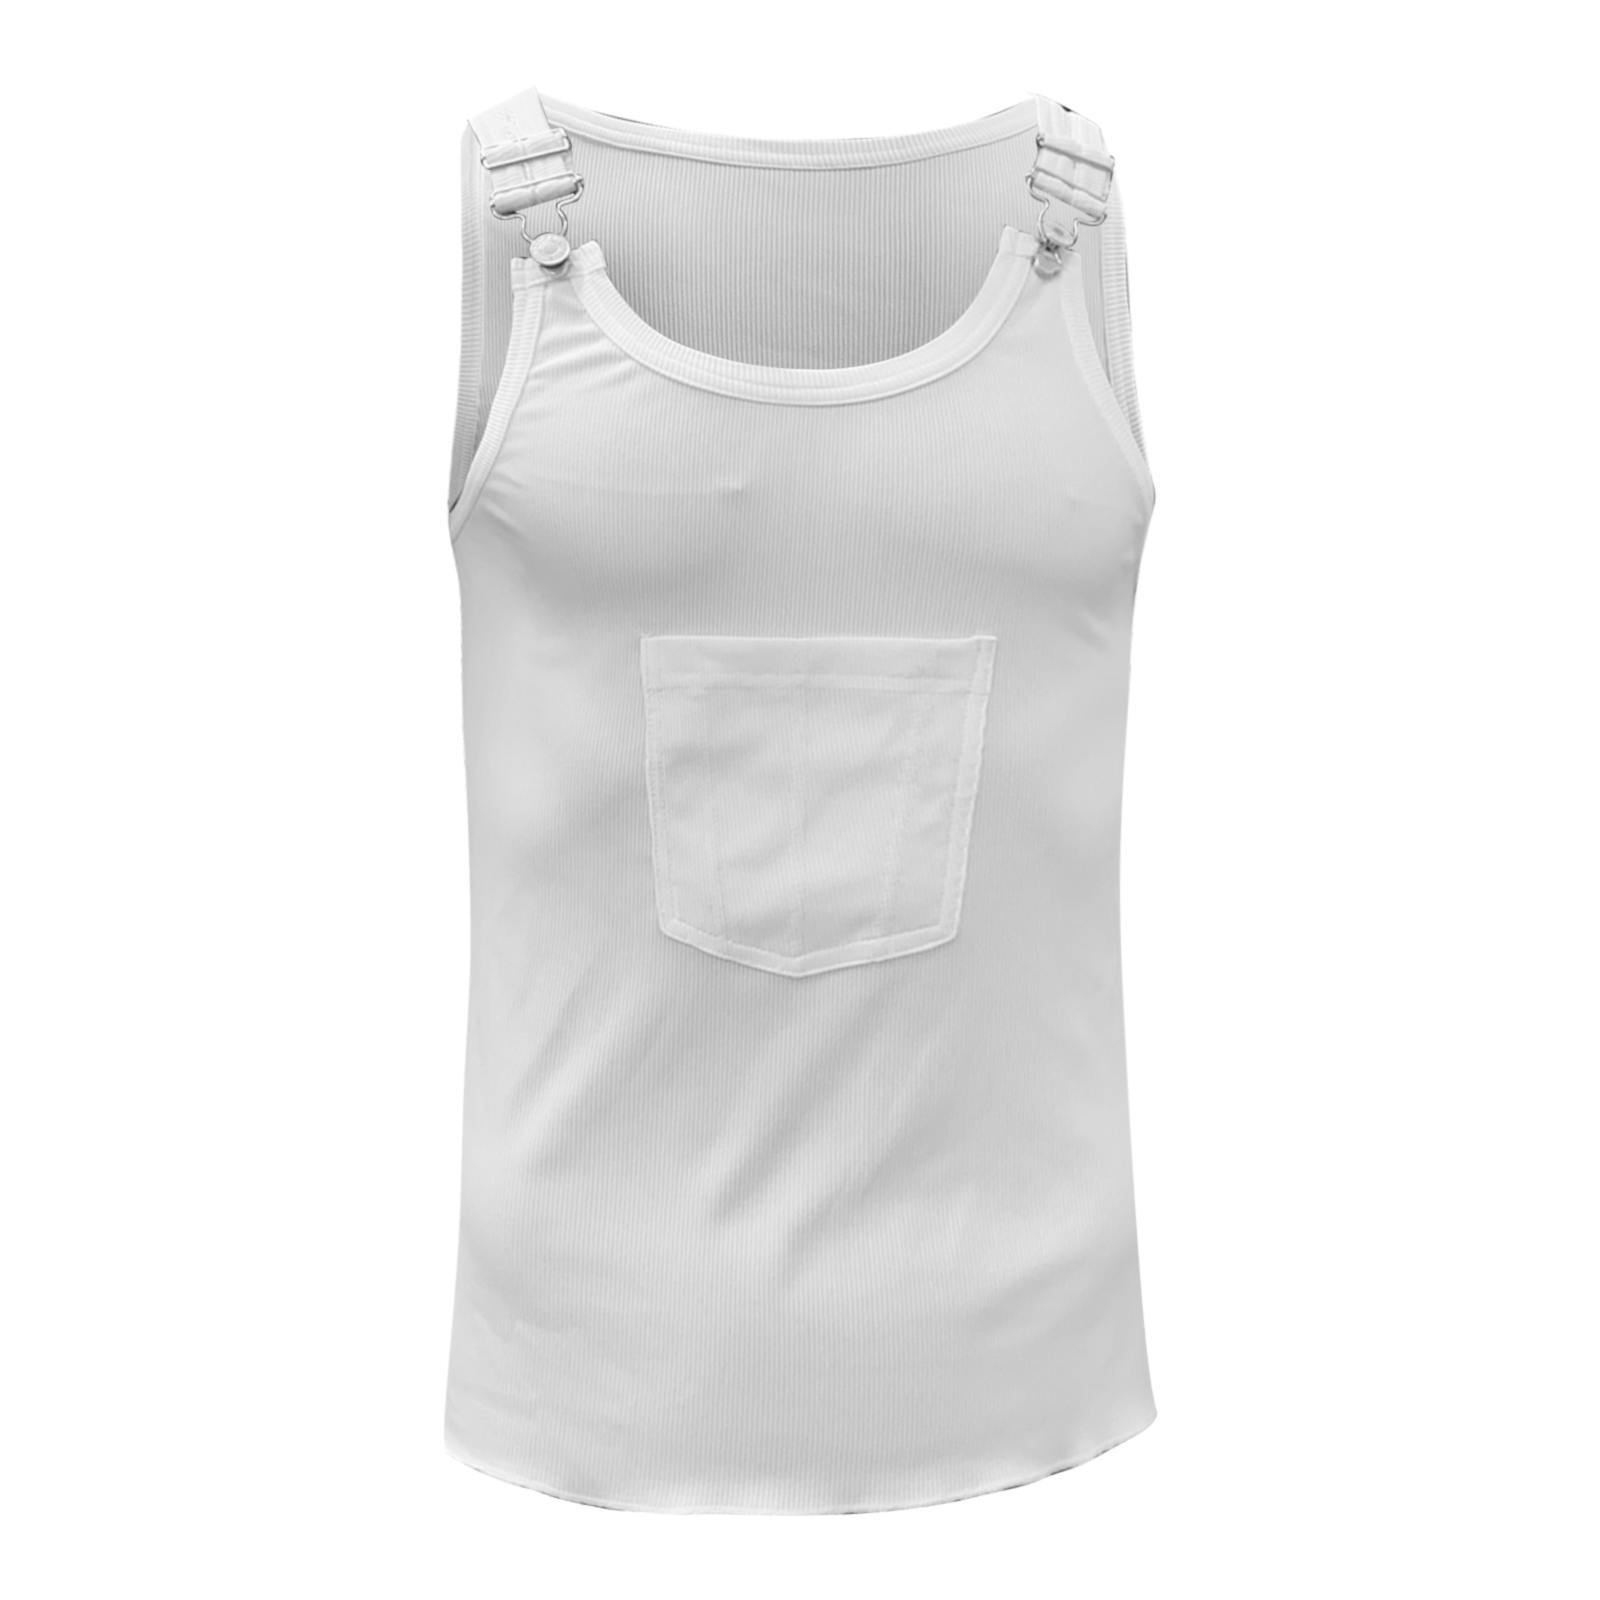 Men's Solid Color Street Sports Personality Tooling Vest Sleeveless Stretch Slim White Top